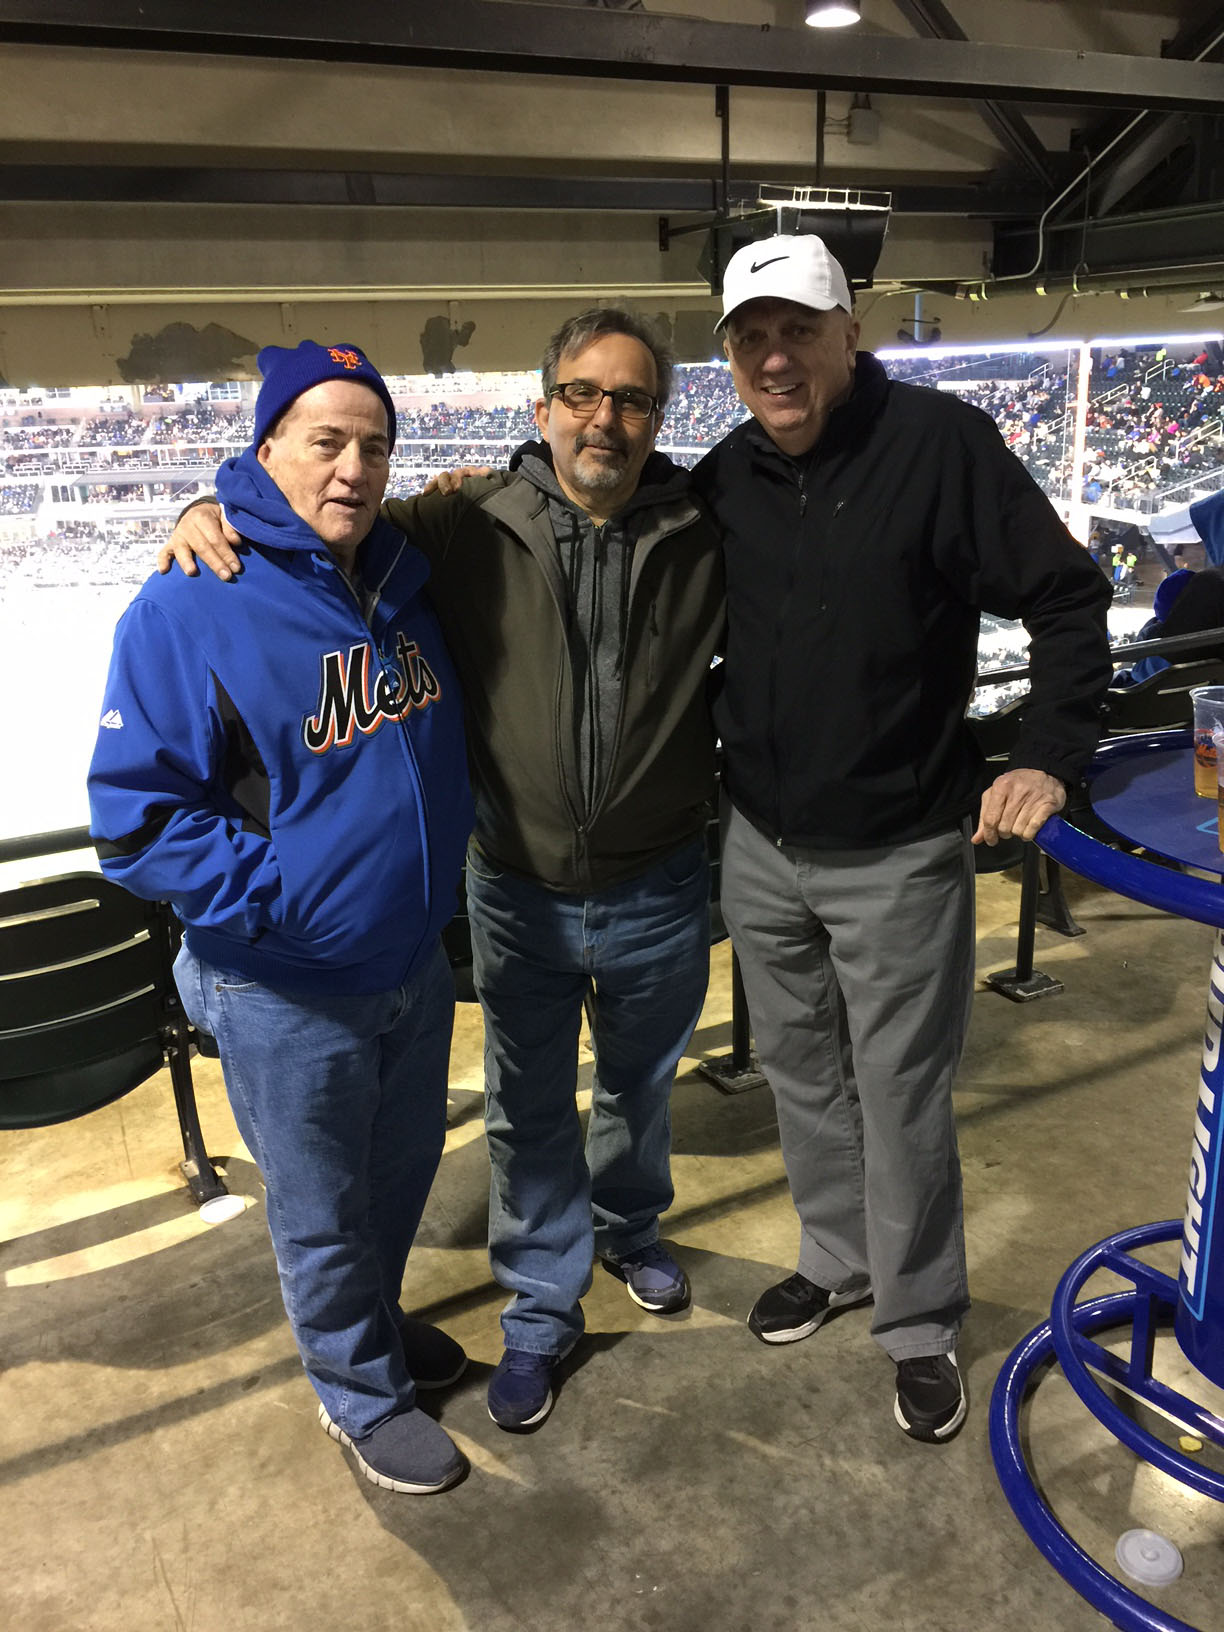 Chilling with Friends from Branch 100 at Citi Field